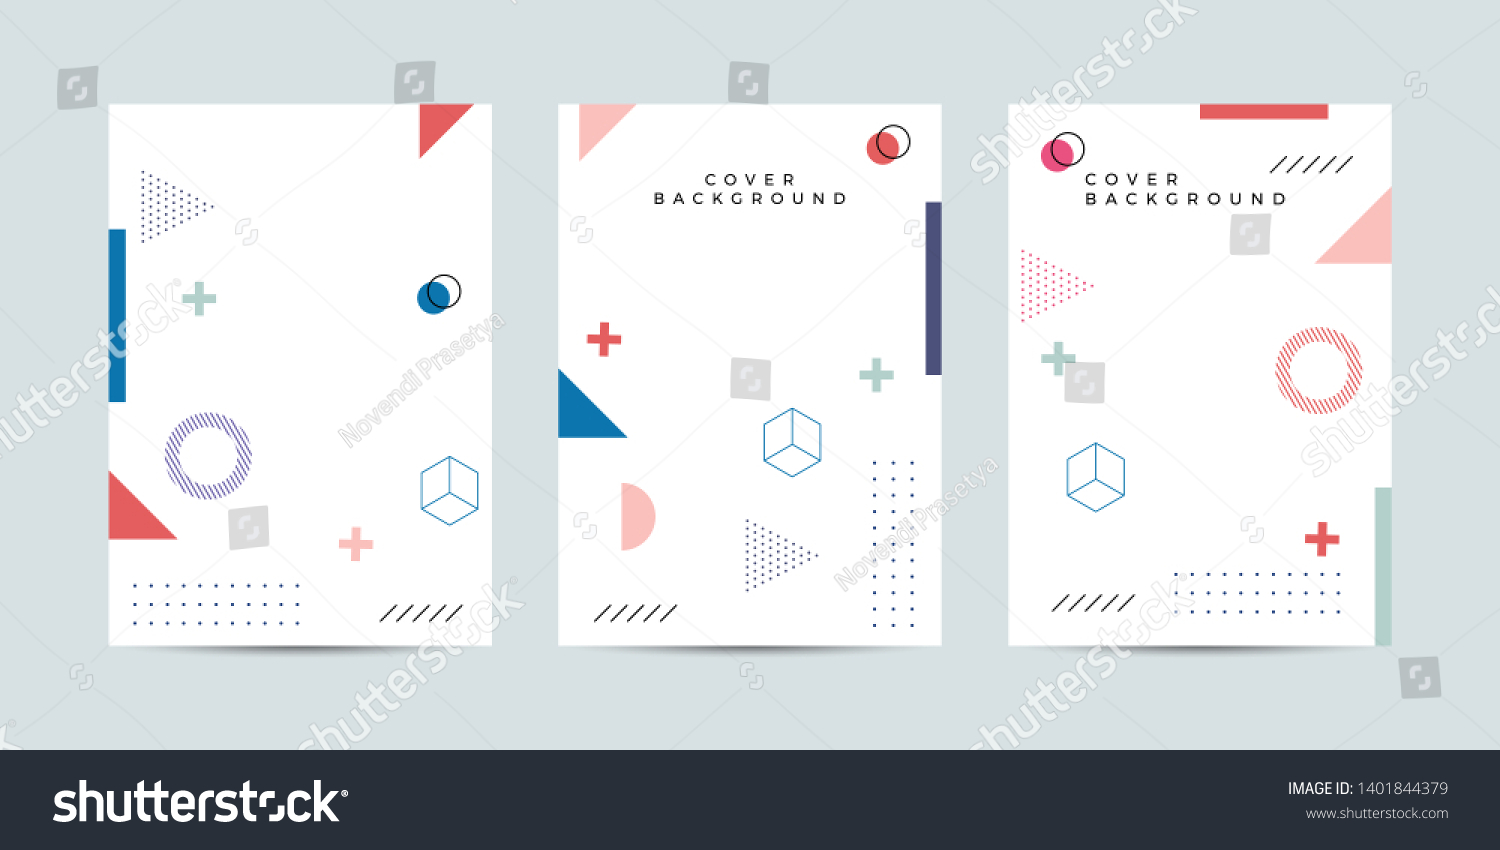 SVG of Covers with minimal design. Cool geometric backgrounds for your design. Applicable for Banners, Placards, Posters, Book, Flyers etc. Eps10 vector svg